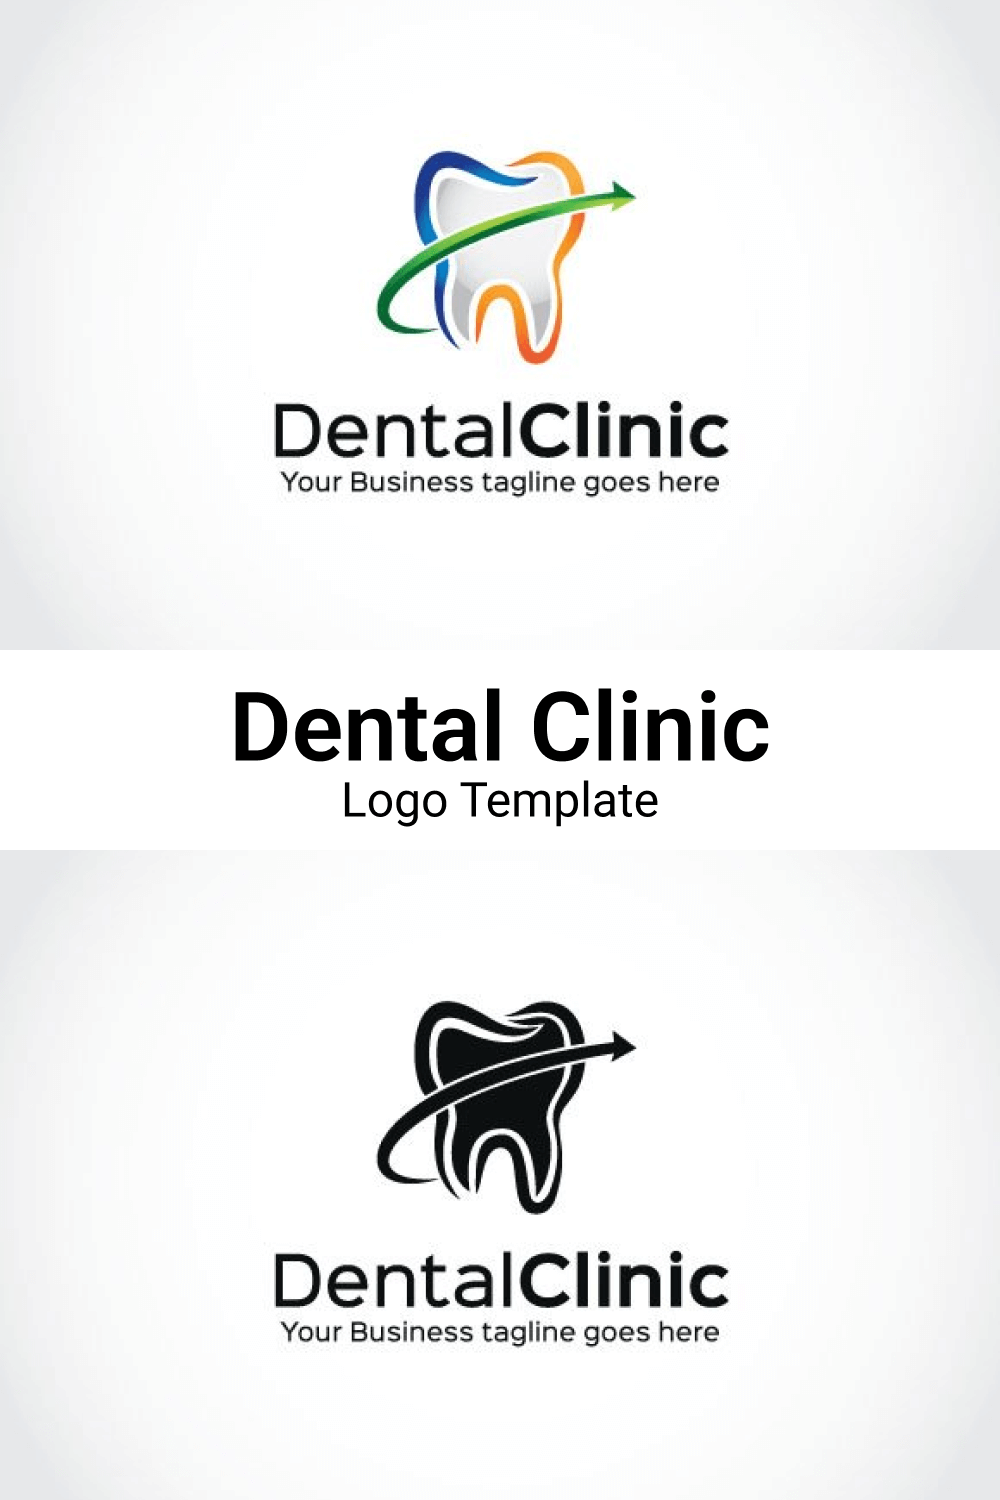 Color and Uncolor Logo of DentalClinic.